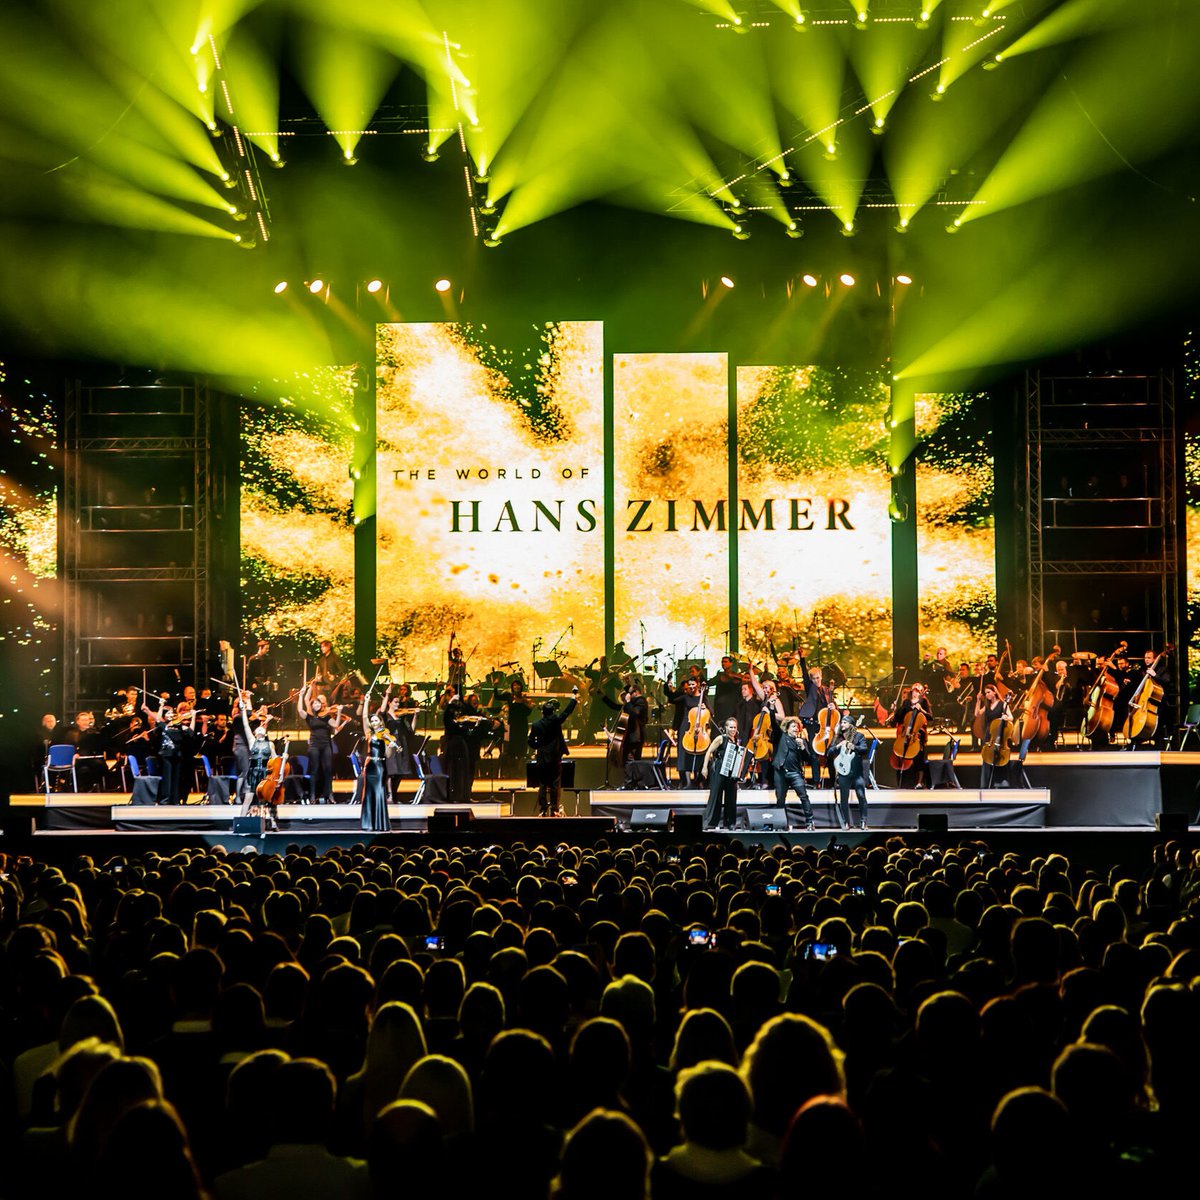 #NextUp | World of Hans Zimmer - A New Dimension makes it's way to #3Arena this Friday, 12 April. Coming along? 🎻 6:30pm - Doors 8:00pm sharp - Show starts Please note: 💳 3Arena is a fully cashless venue 👜 Maximum bag size limit is 40cm x 40cm x 20cm